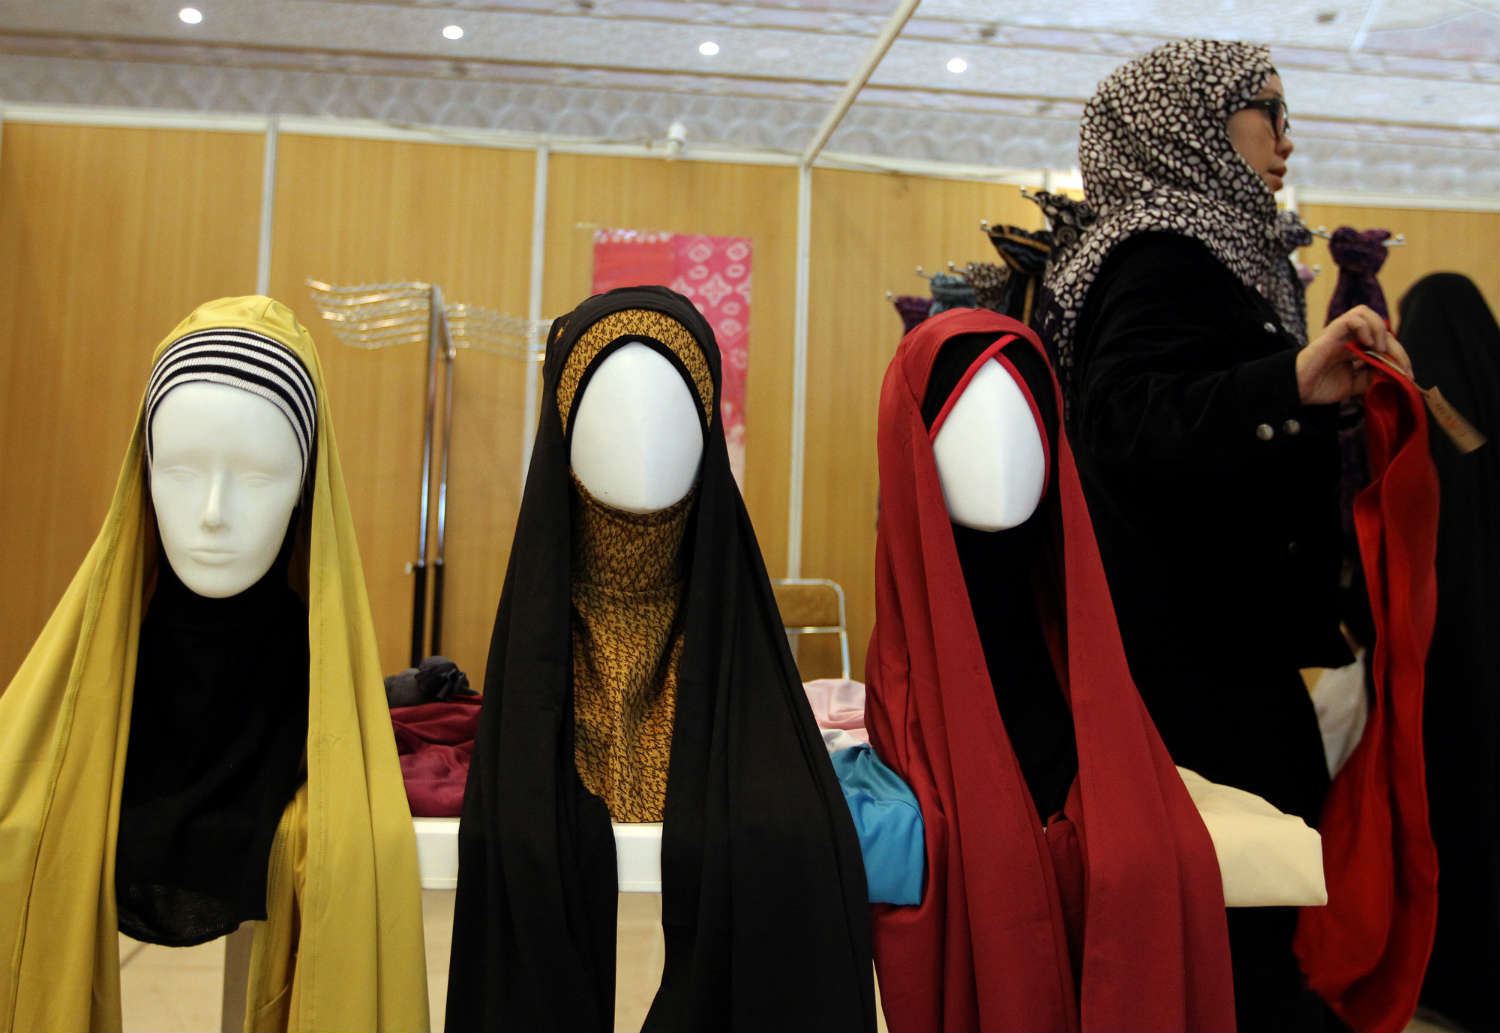 Tehran fashion houses are pushing boundaries in Tehran (ATTA KENARE/AFP/Getty Images)